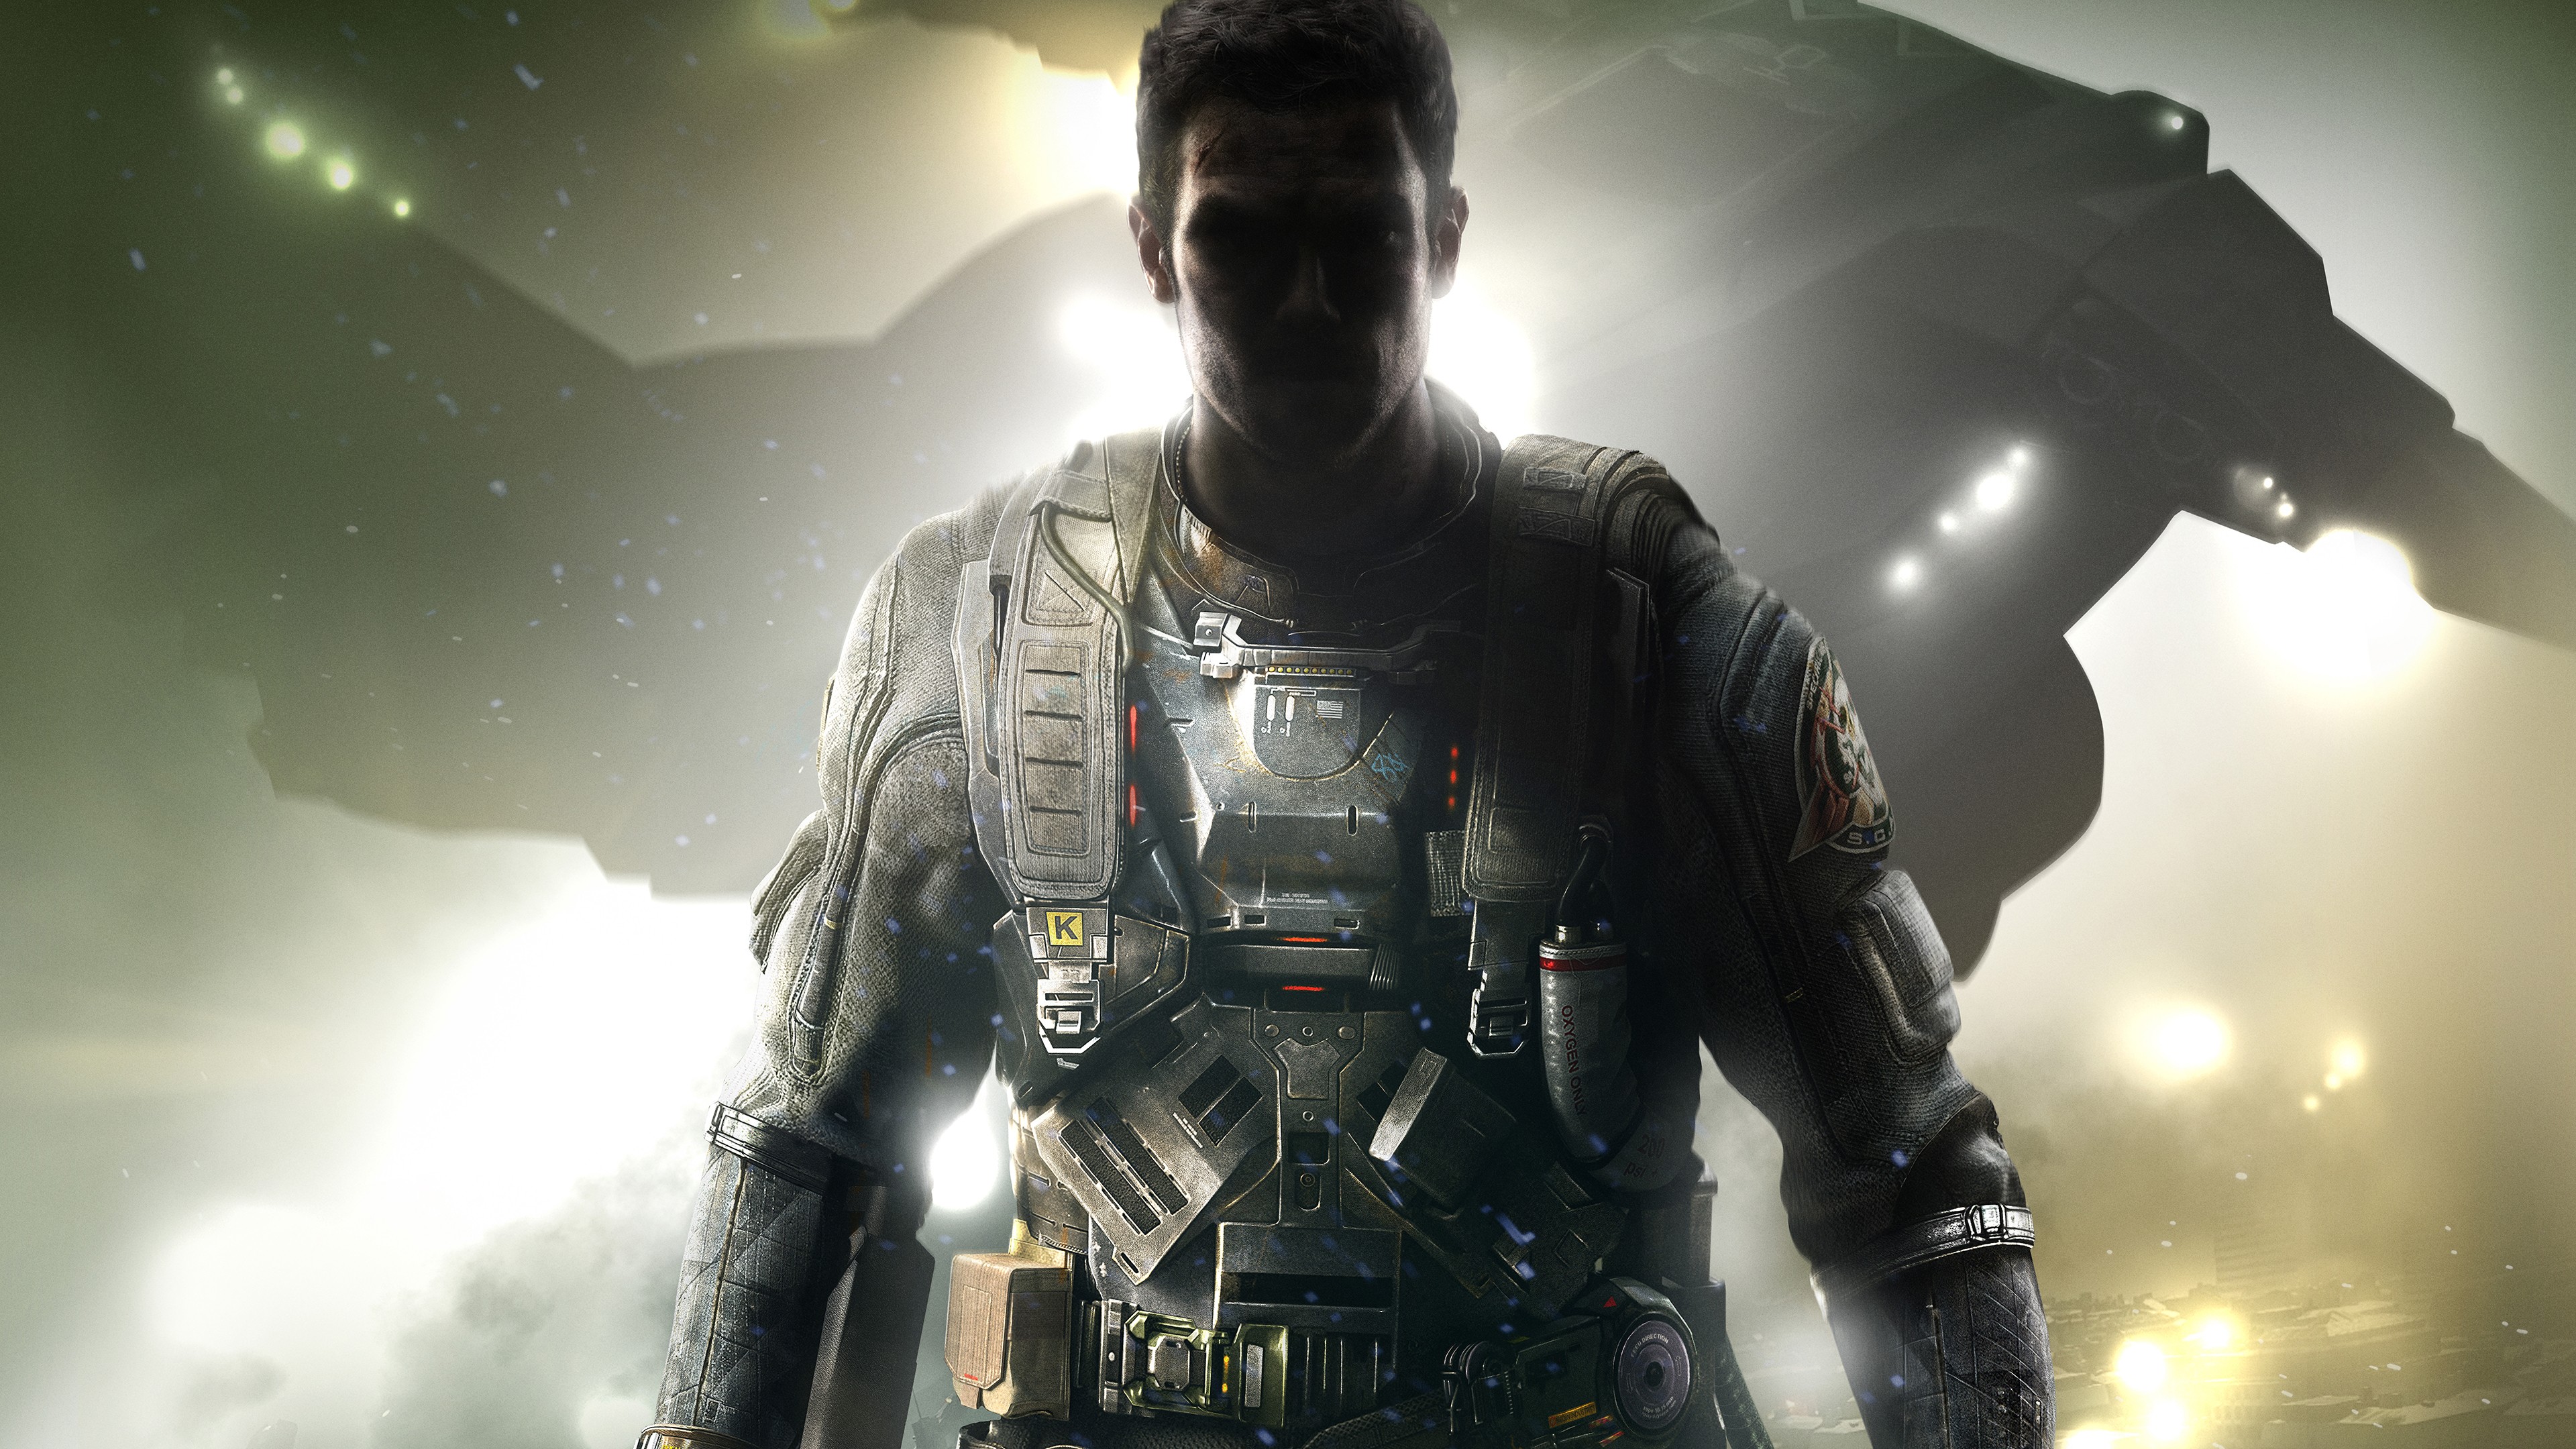 General 3840x2160 Call of Duty Call of Duty: Infinite Warfare PC gaming Call of Duty: Infinite Warfare video game characters men video games video game men